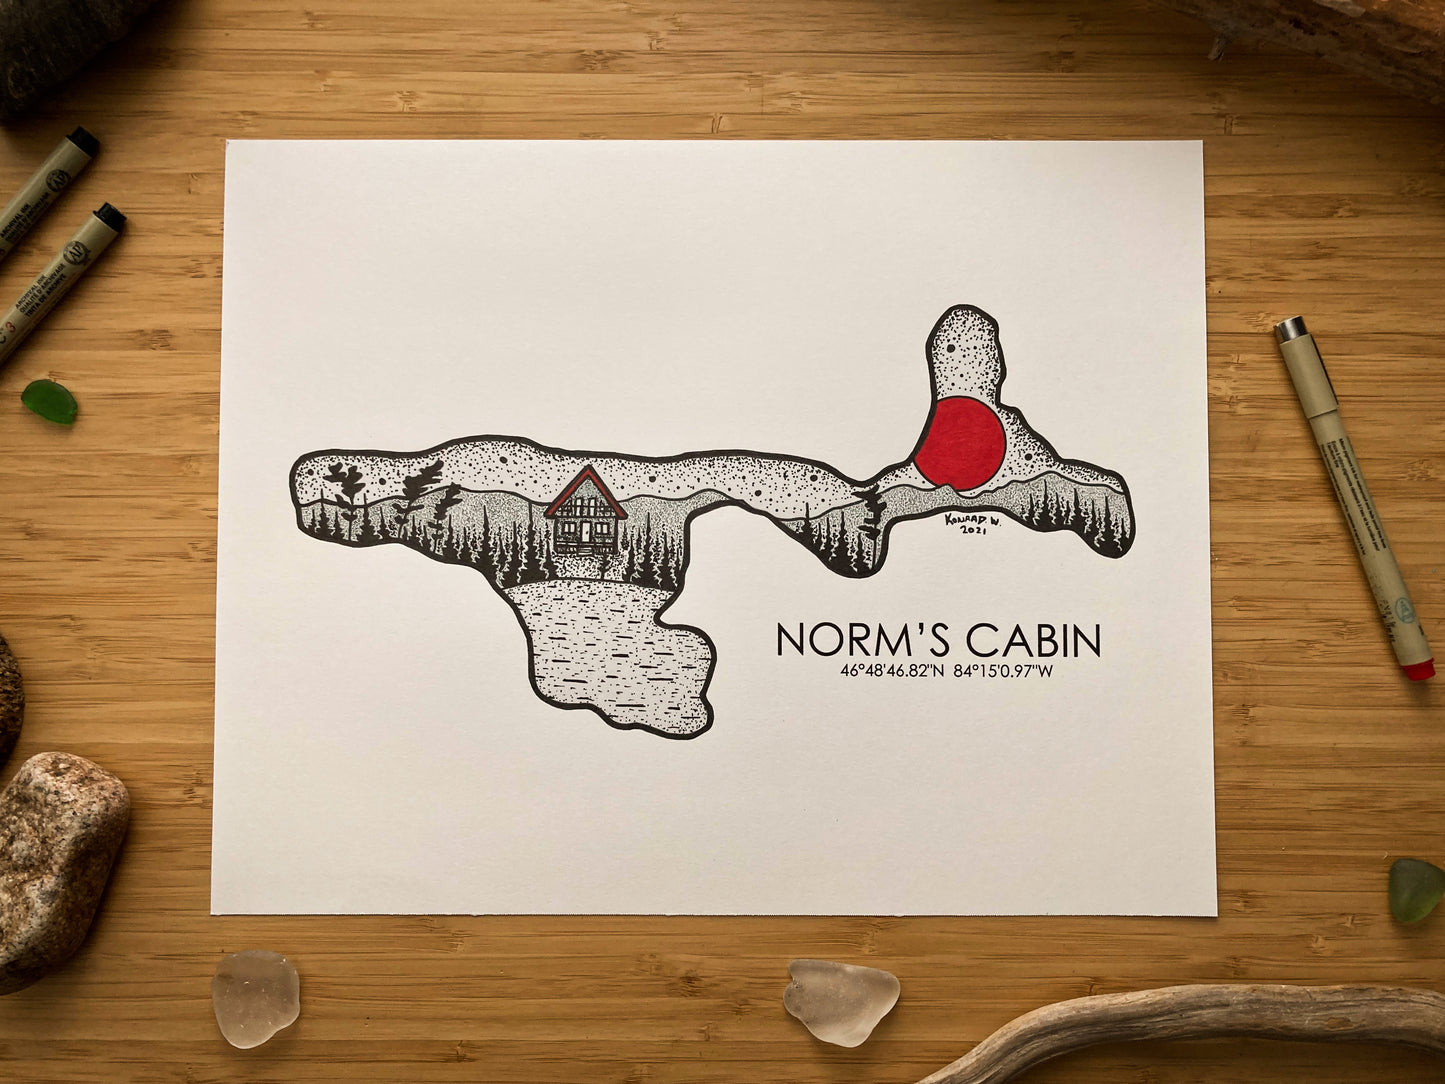 Norm’s Cabin - Pen and Ink PRINT